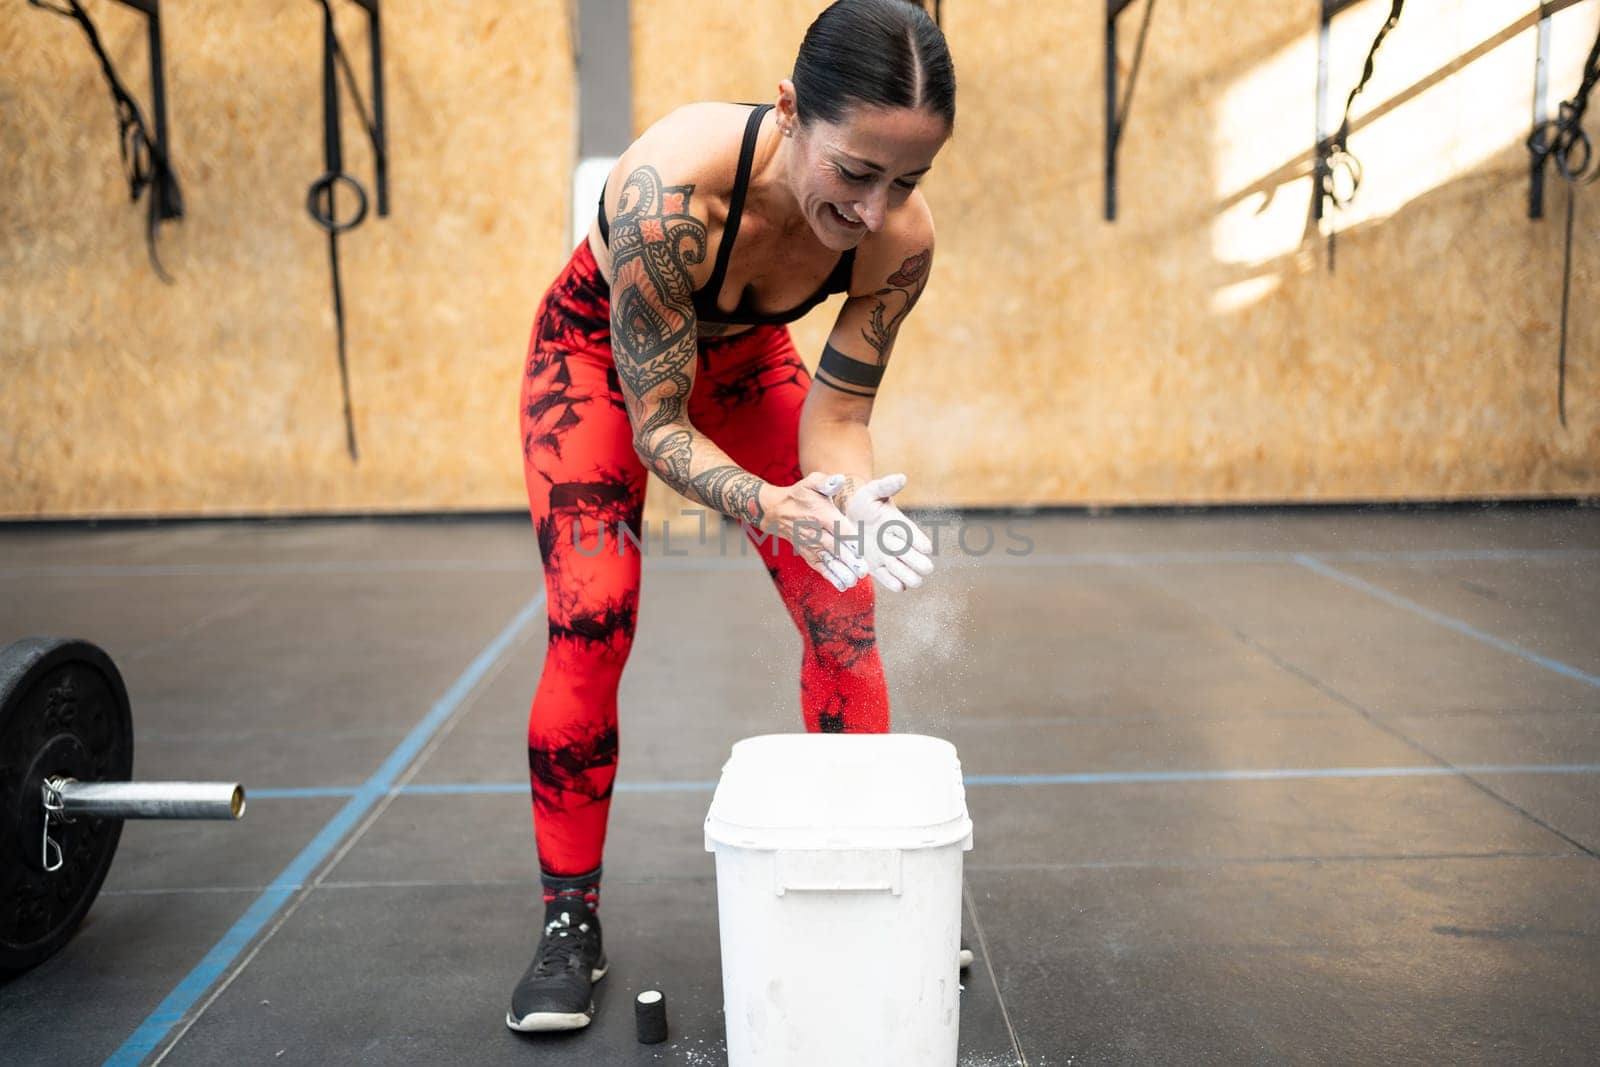 Mature fit woman with tattooed arms applying magnesium powder to her hands for weightlifting